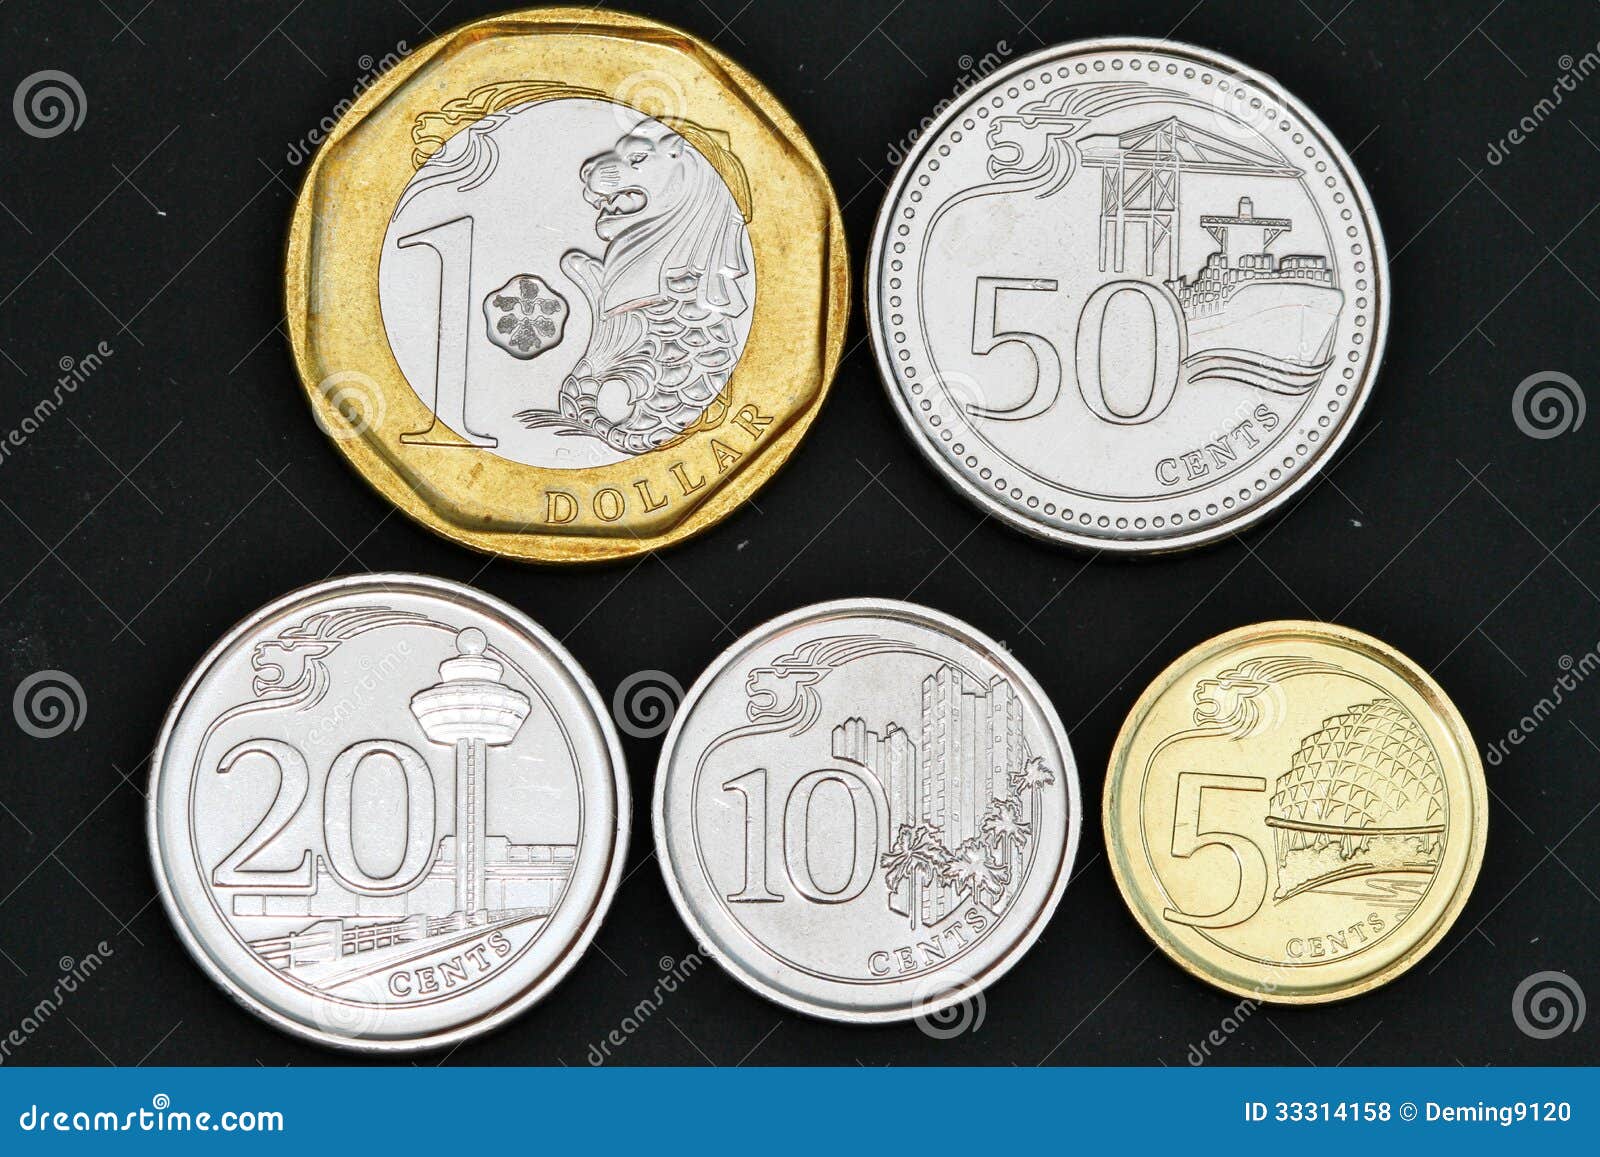 2013 Singapore coins editorial stock photo. Image of color ...